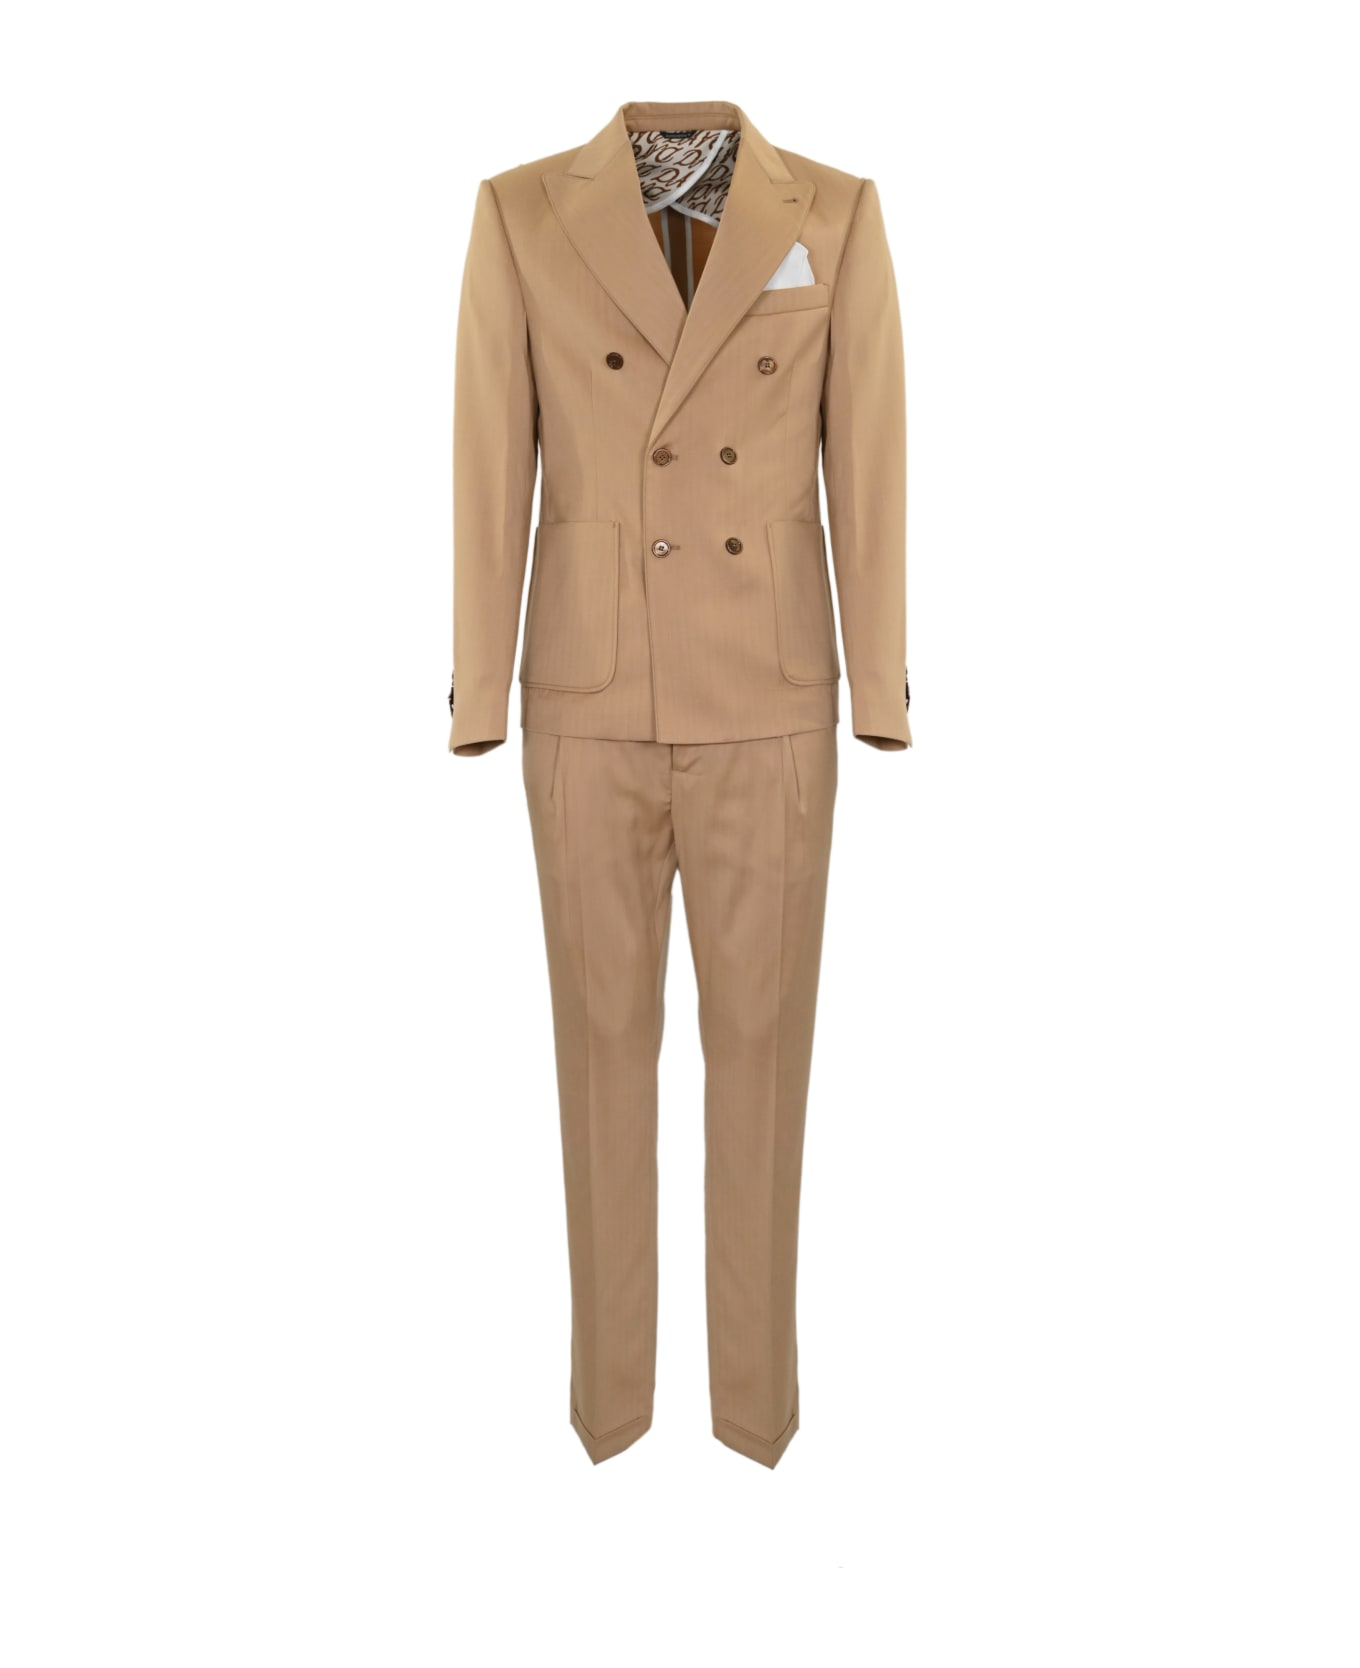 Daniele Alessandrini Camel Double-breasted Suit - Cammello